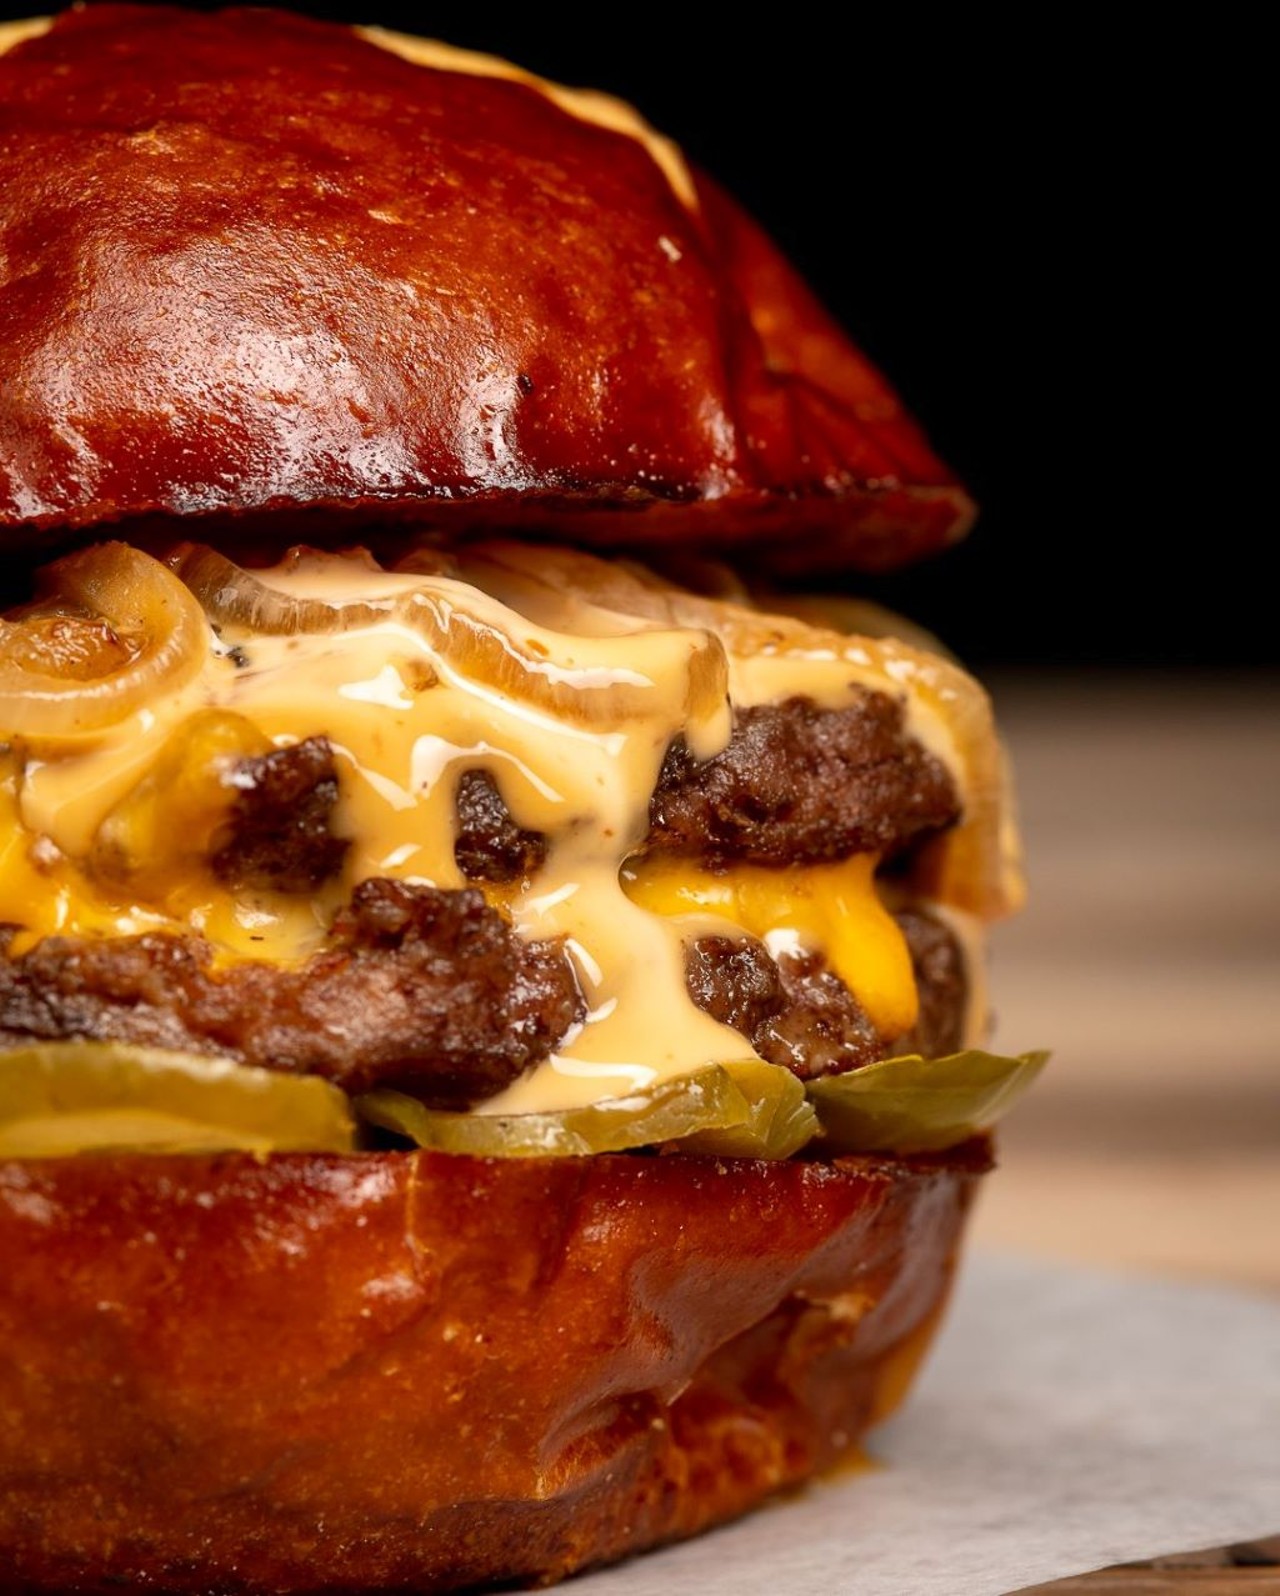 American Social 
407-454-9992, 7335 W. Sand Lake Road #101
Stop by during their burger Mondays for a sweet deal on bourbon, whiskey and burgers. Their social smash burger is served on a pretzel bun and topped with caramelized onions, cheddar cheese, smash sauce and pickles. 
Photo via American Social/Facebook